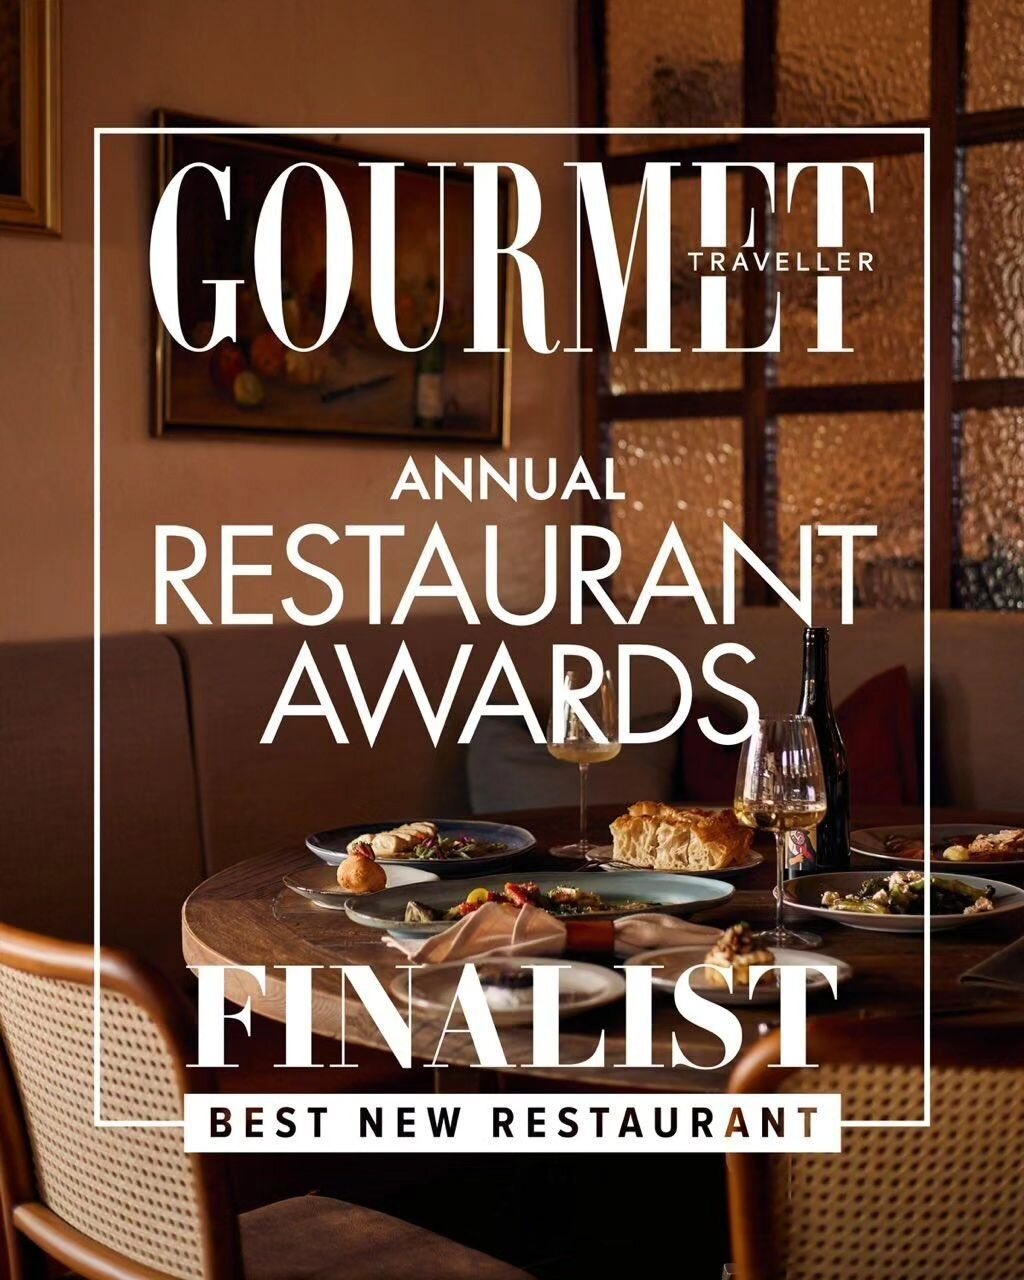 We are trilled to announce our nomination as finalists for Best New Restaurant at the annual @gourmettraveller Restaurant Awards.

This recognition is a statement to our commitment to providing you with exceptional dining experience and an honour to 